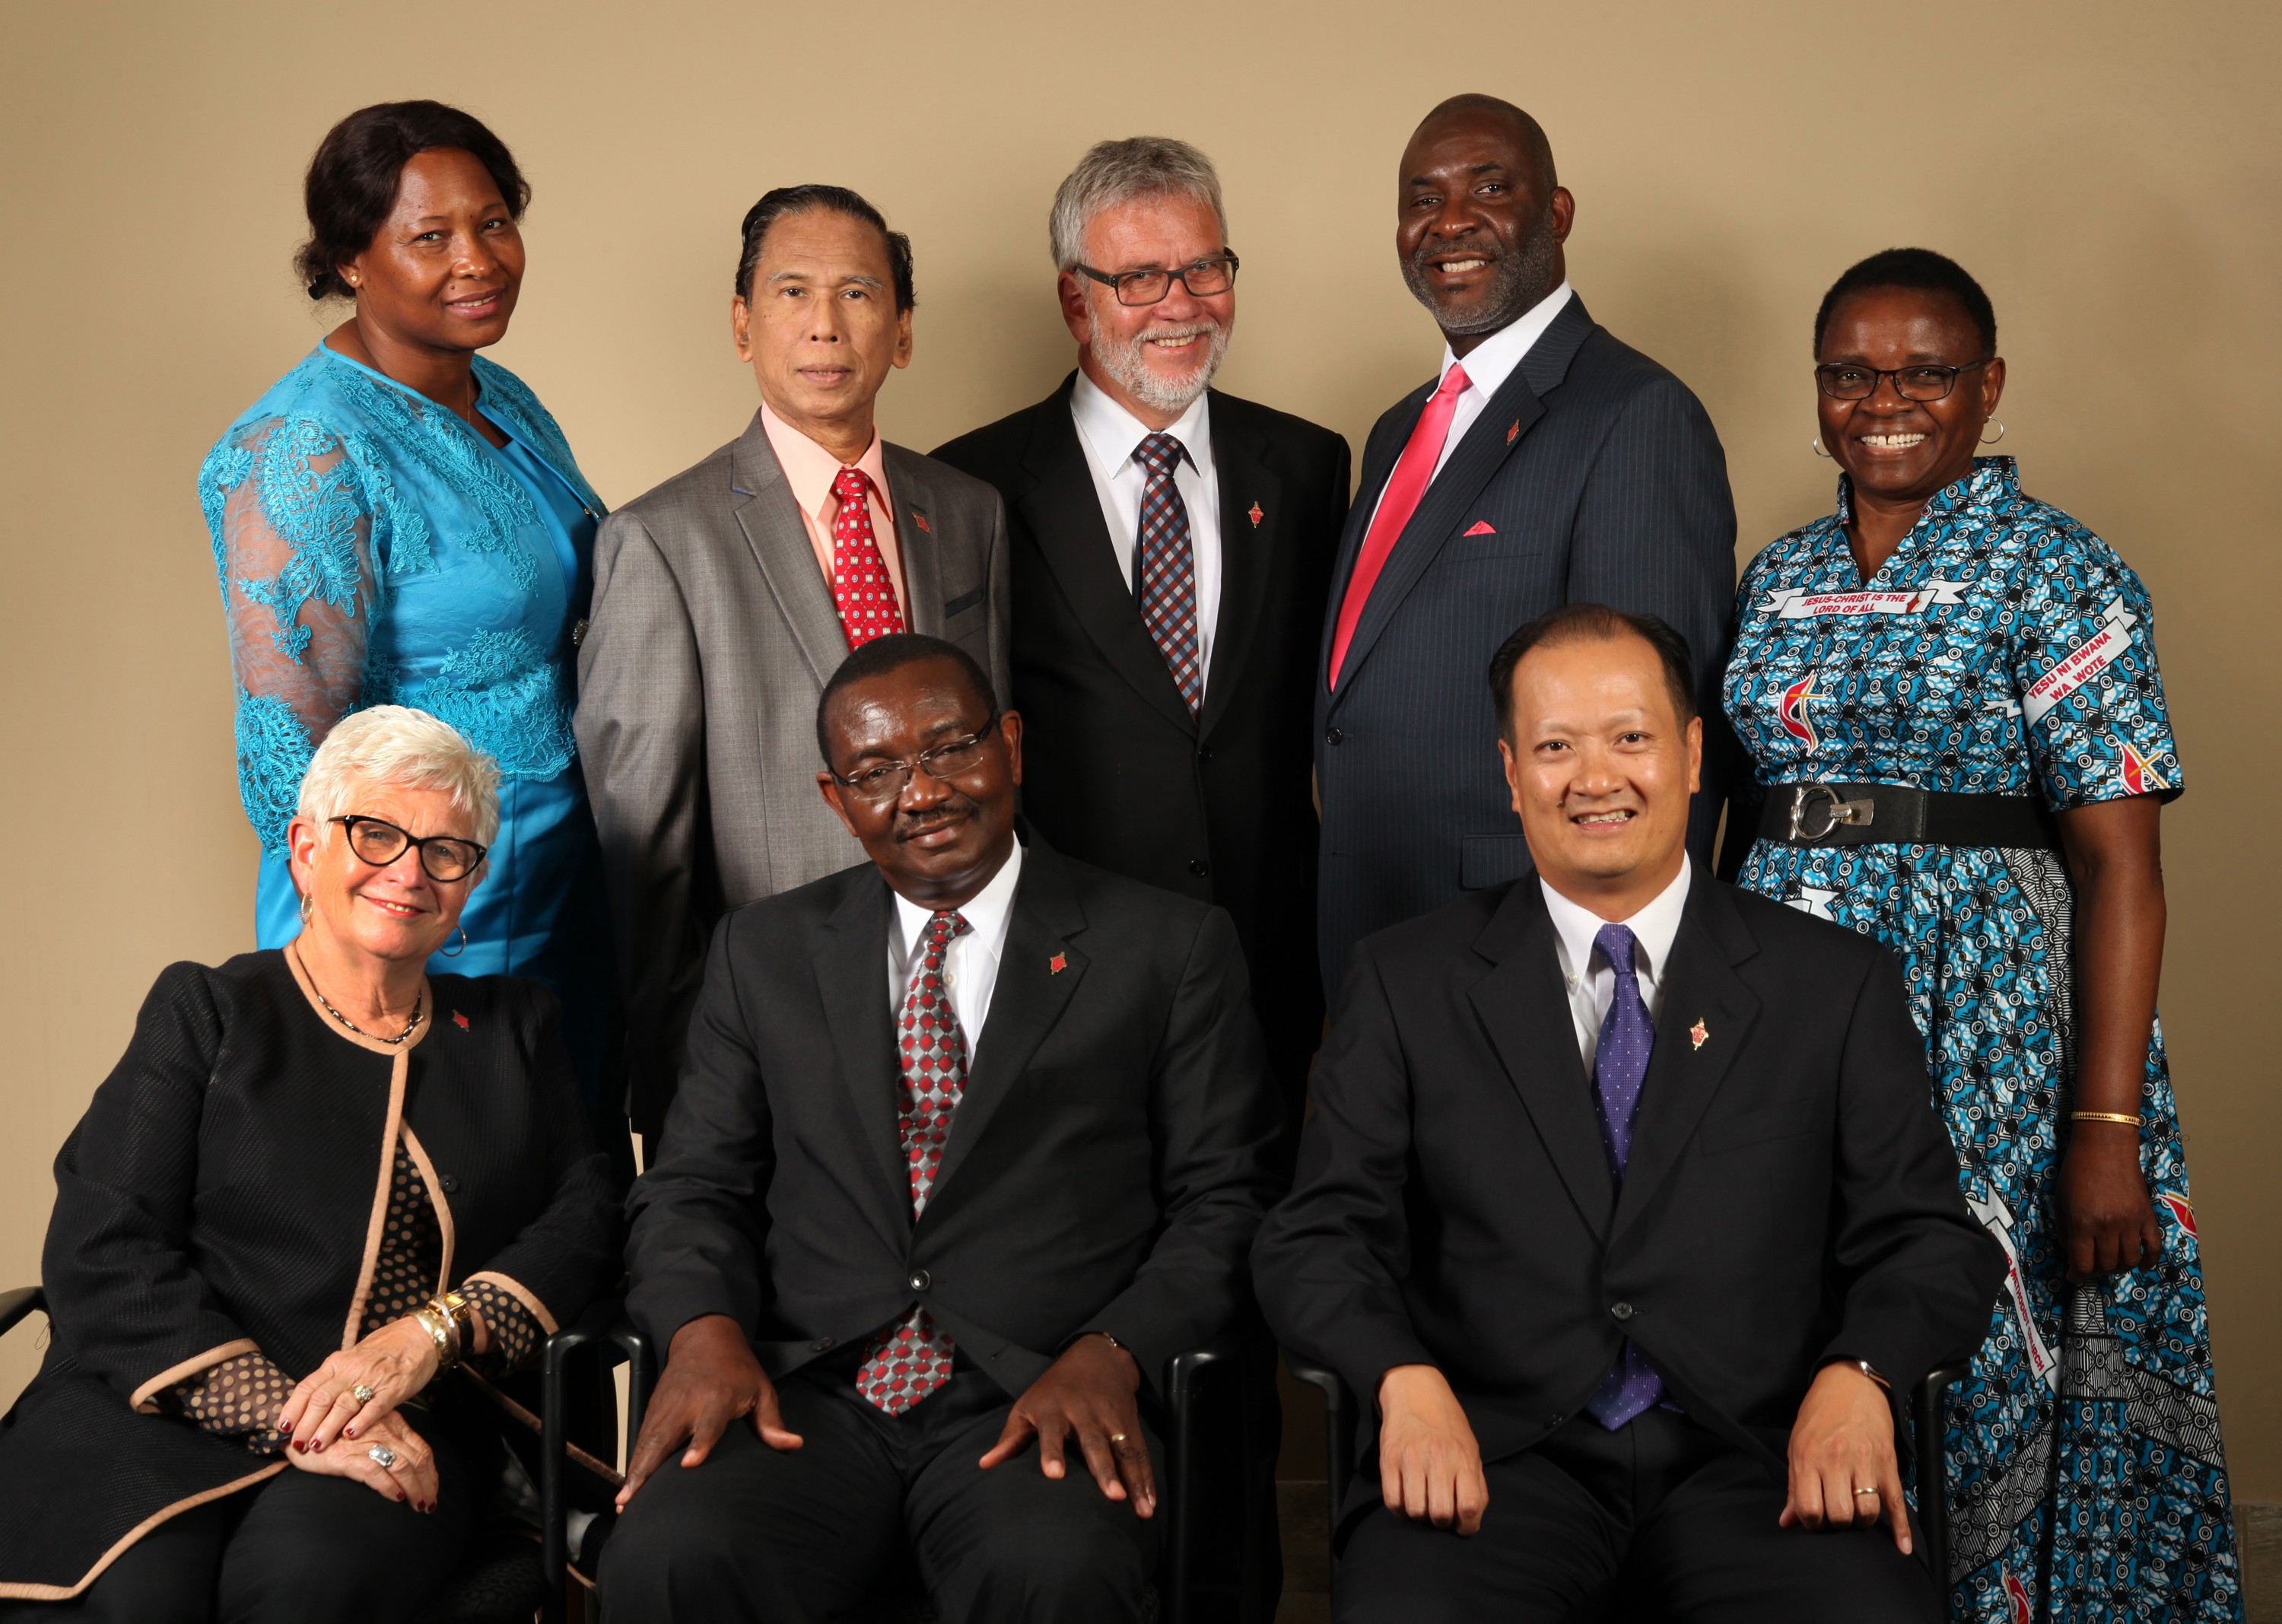 Members of the 2016-2020 Judicial Council. (From left) Front row: Deanell Reece Tacha, N. Oswald Tweh Sr., the Rev. Luan-Vu Tran. Back row: Lydia Romão Gulele, Ruben T. Reyes, the Rev. Øyvind Helliesen, the Rev. Dennis Blackwell, and the Rev. J. Kabamba Kiboko. (Not pictured, Beth Capen)  Photo by Kathleen Barry, United Methodist Communications